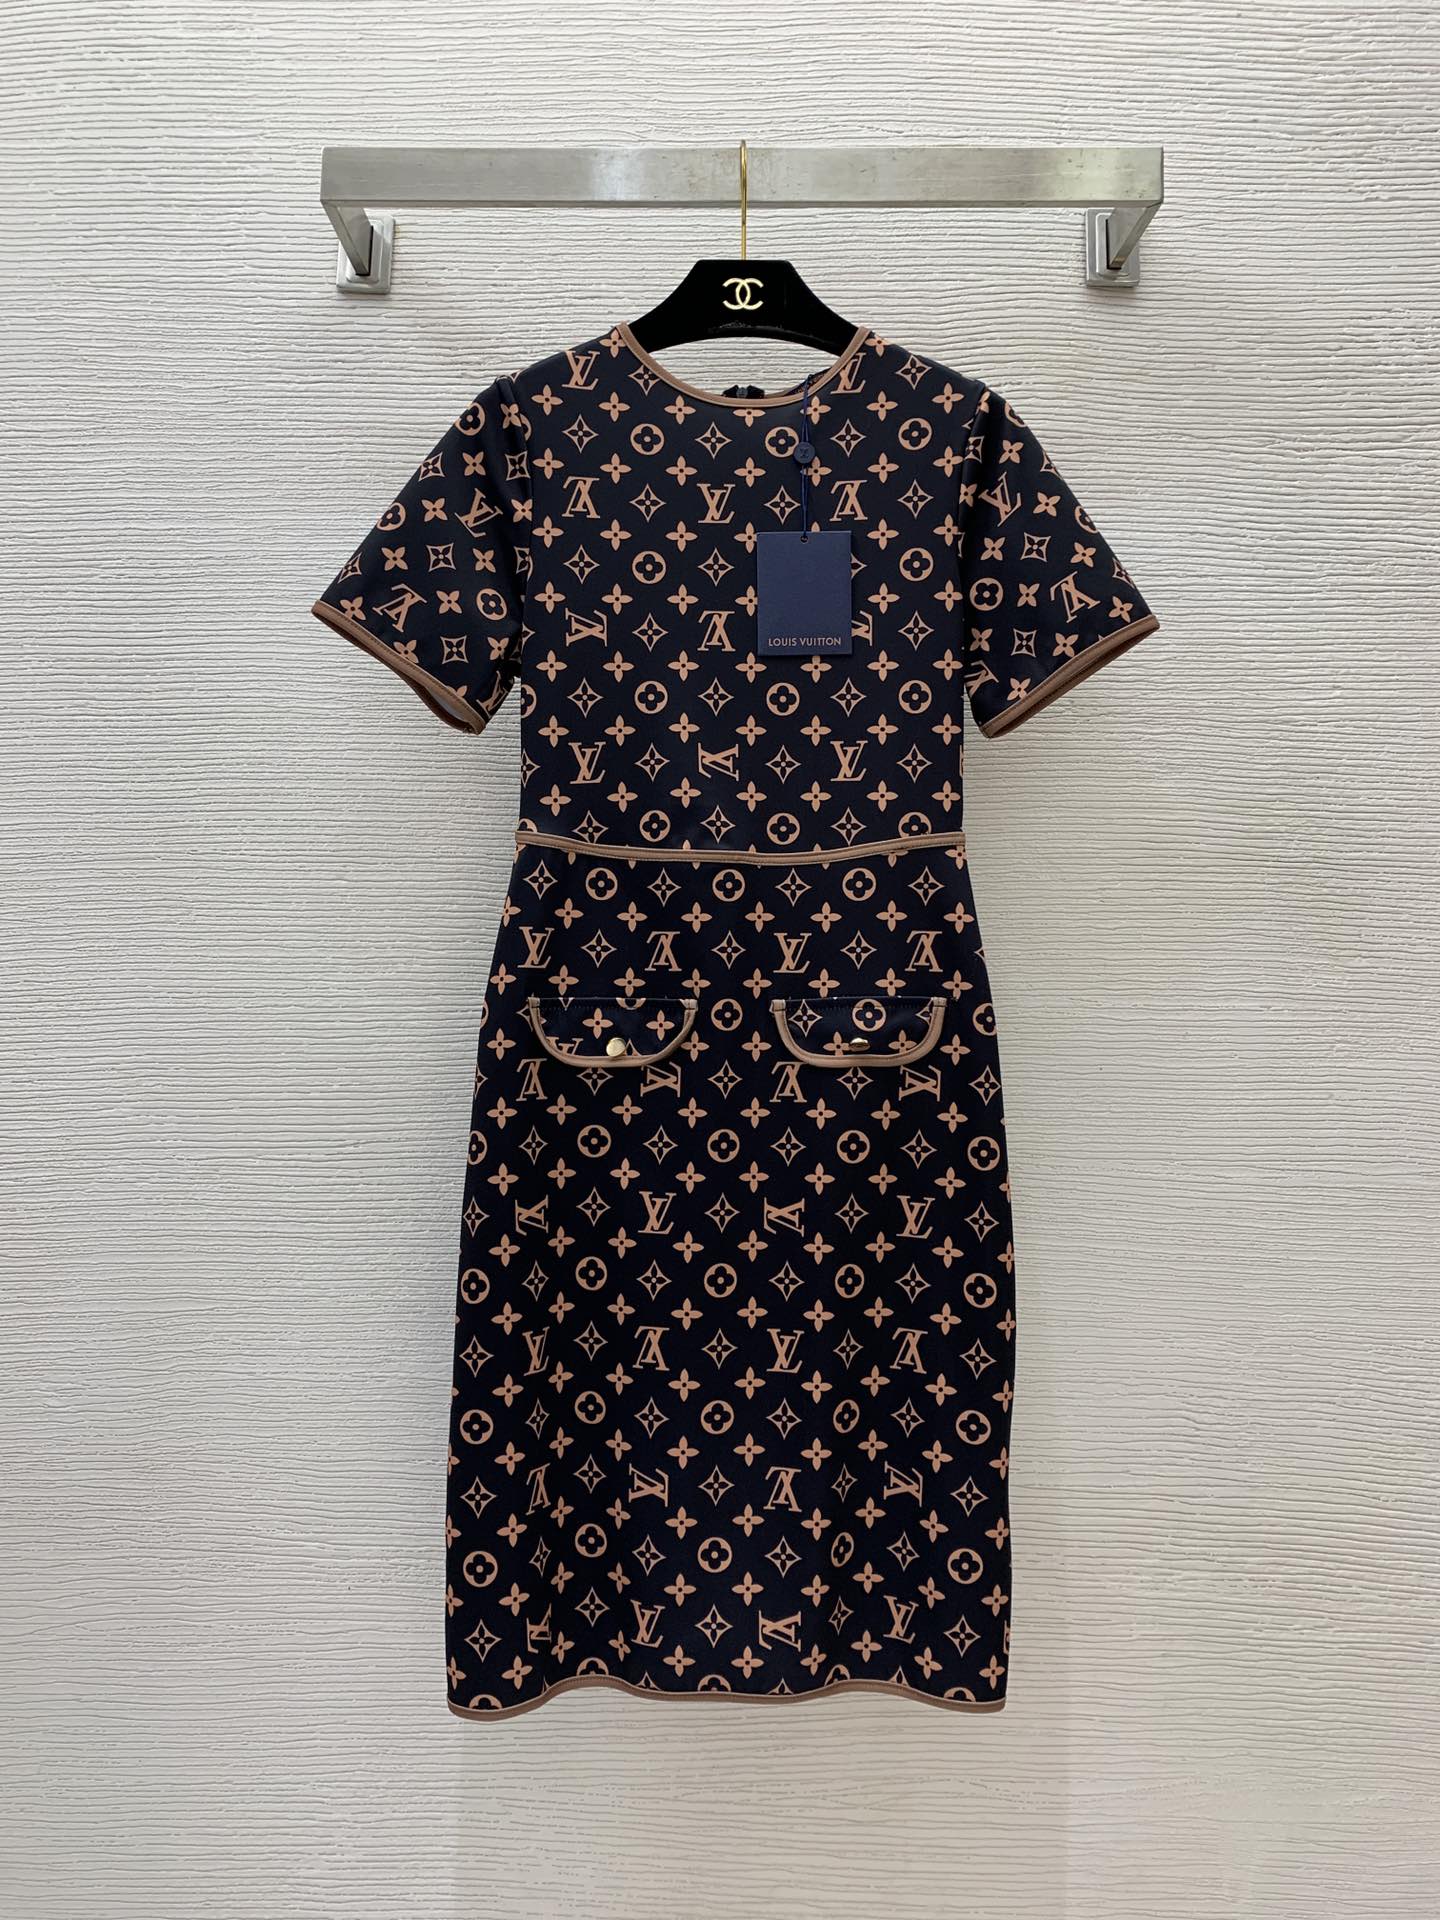 Louis Vuitton Clothing Dresses Printing Summer Collection